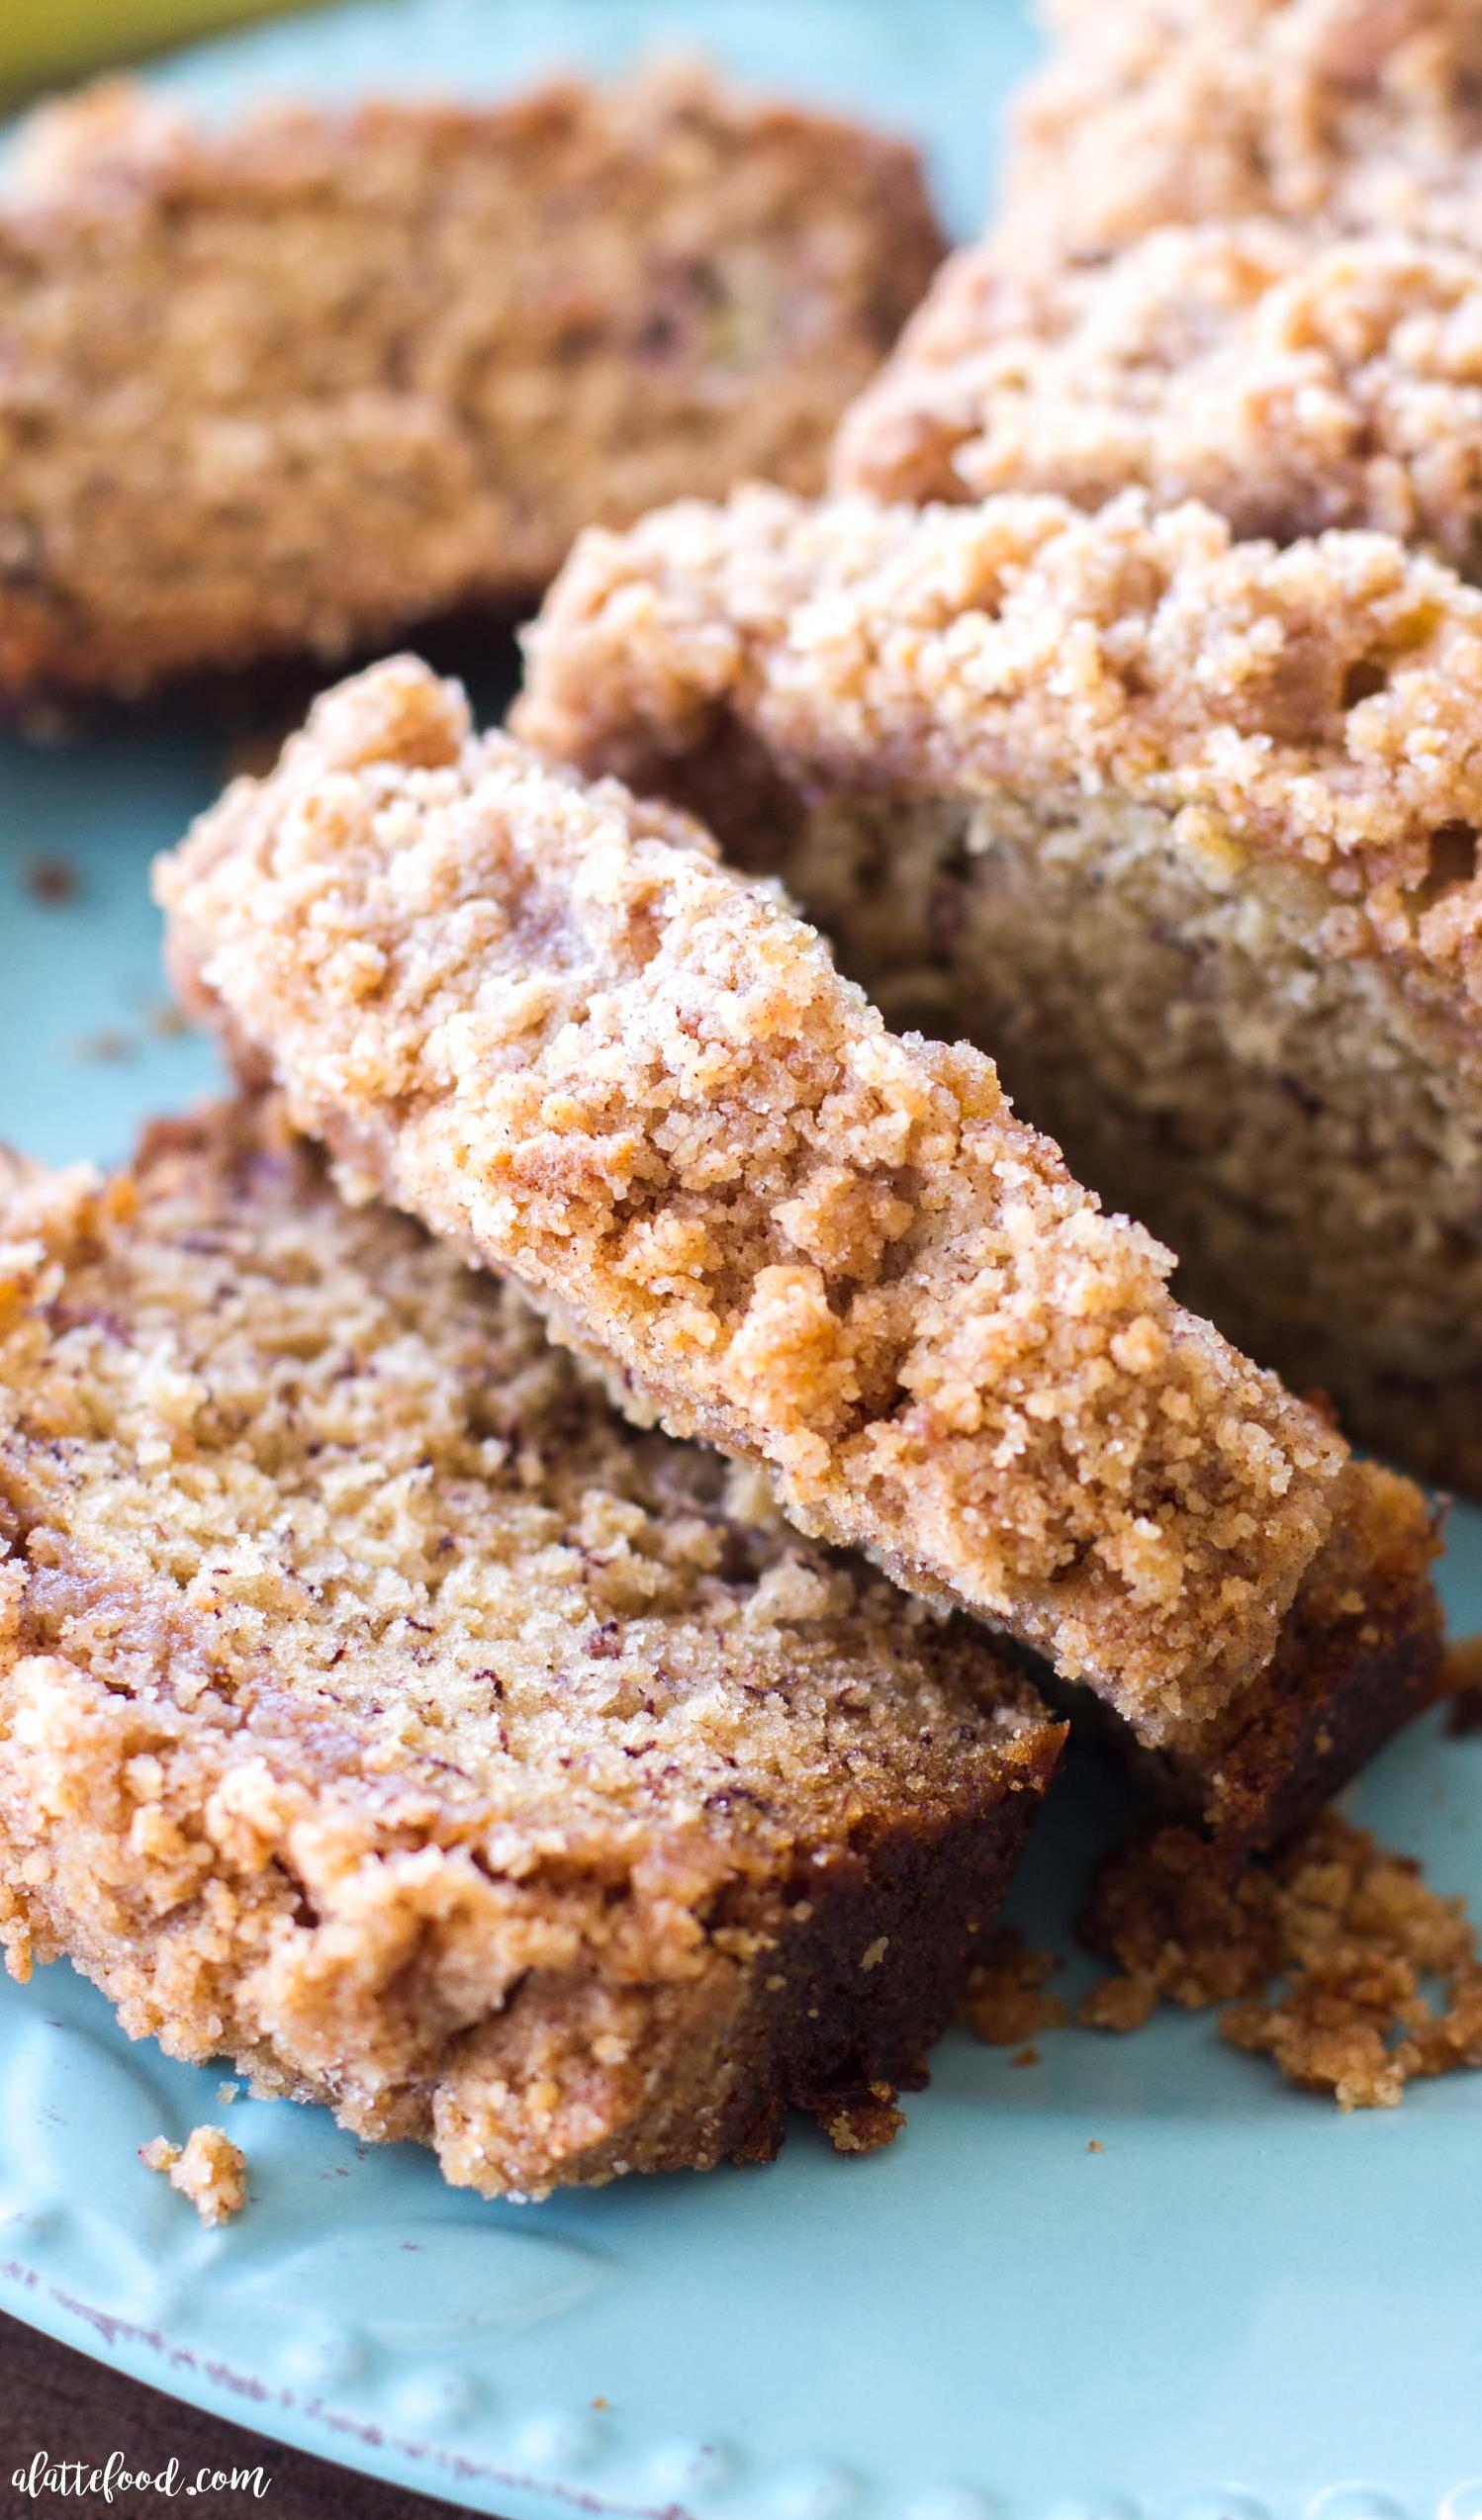  This tempting banana coffee cake is the perfect excuse for a mid-day indulgence.